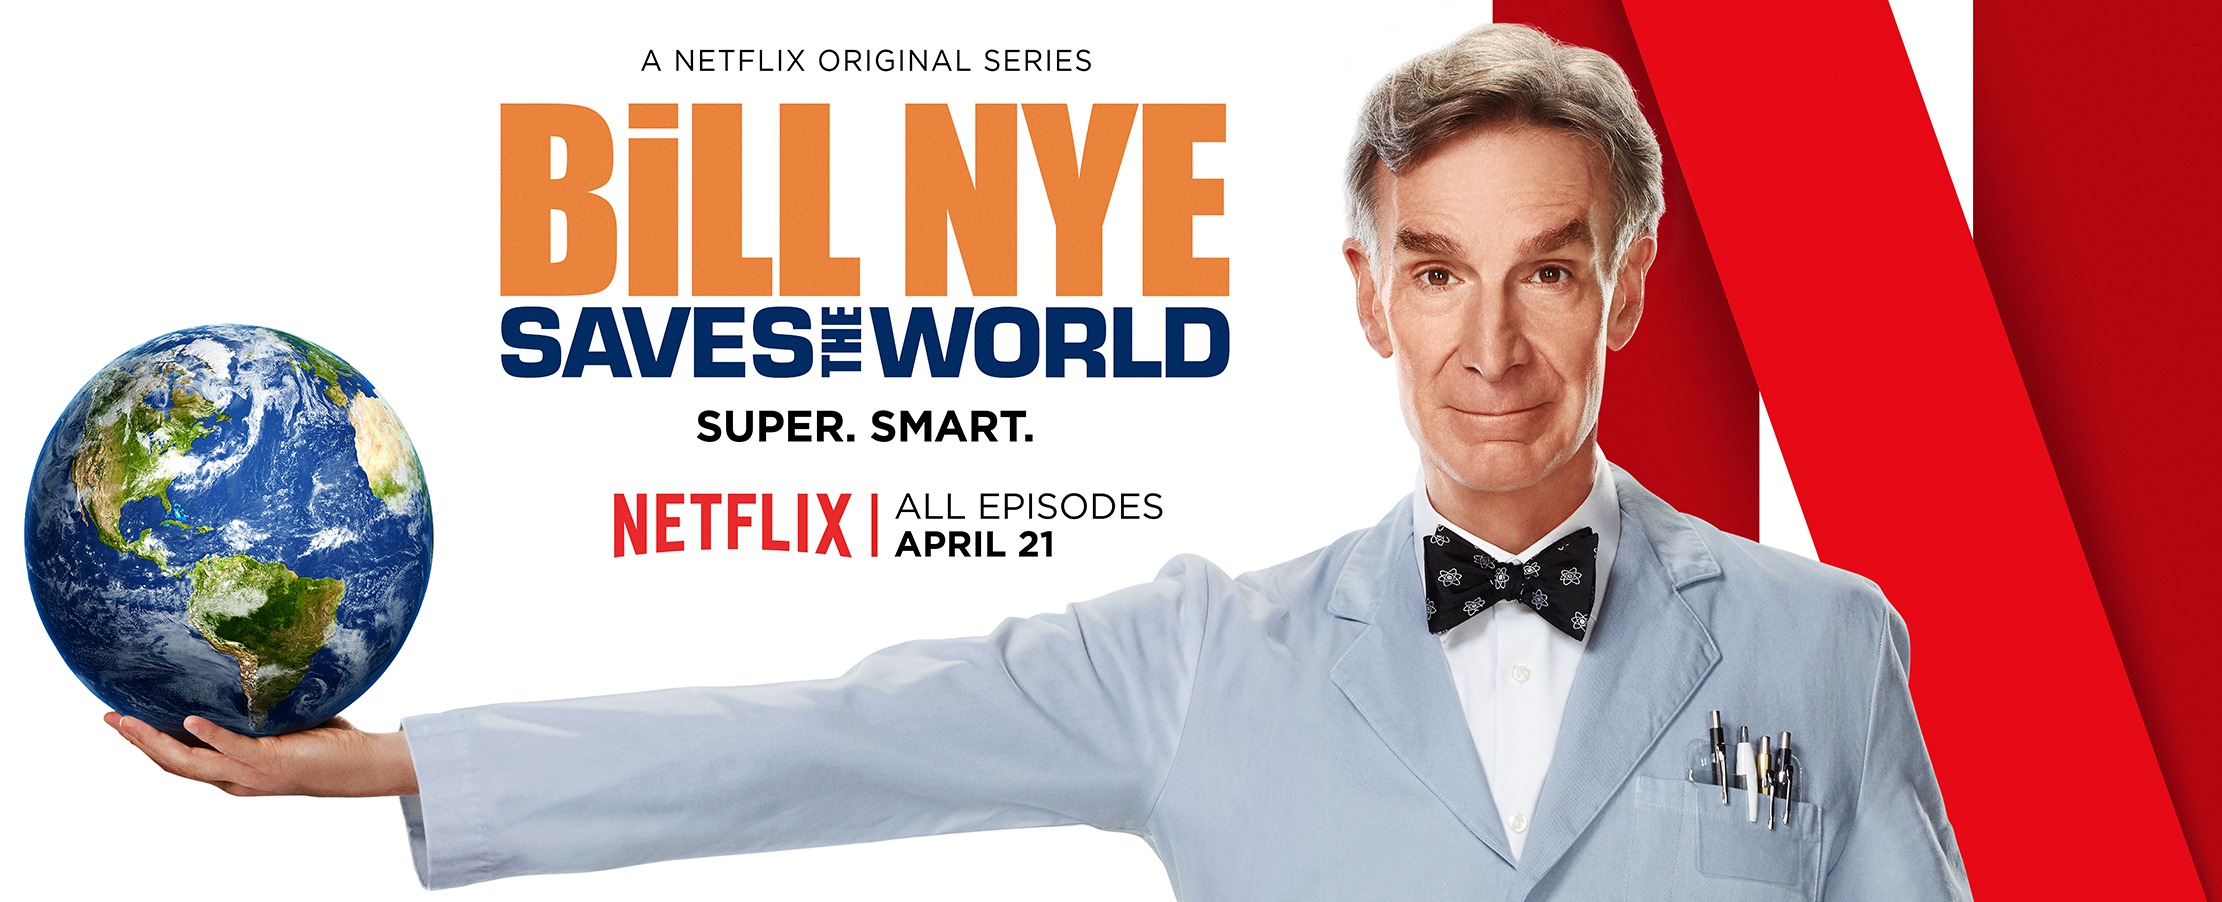 Mega Sized TV Poster Image for Bill Nye Saves the World (#2 of 2)